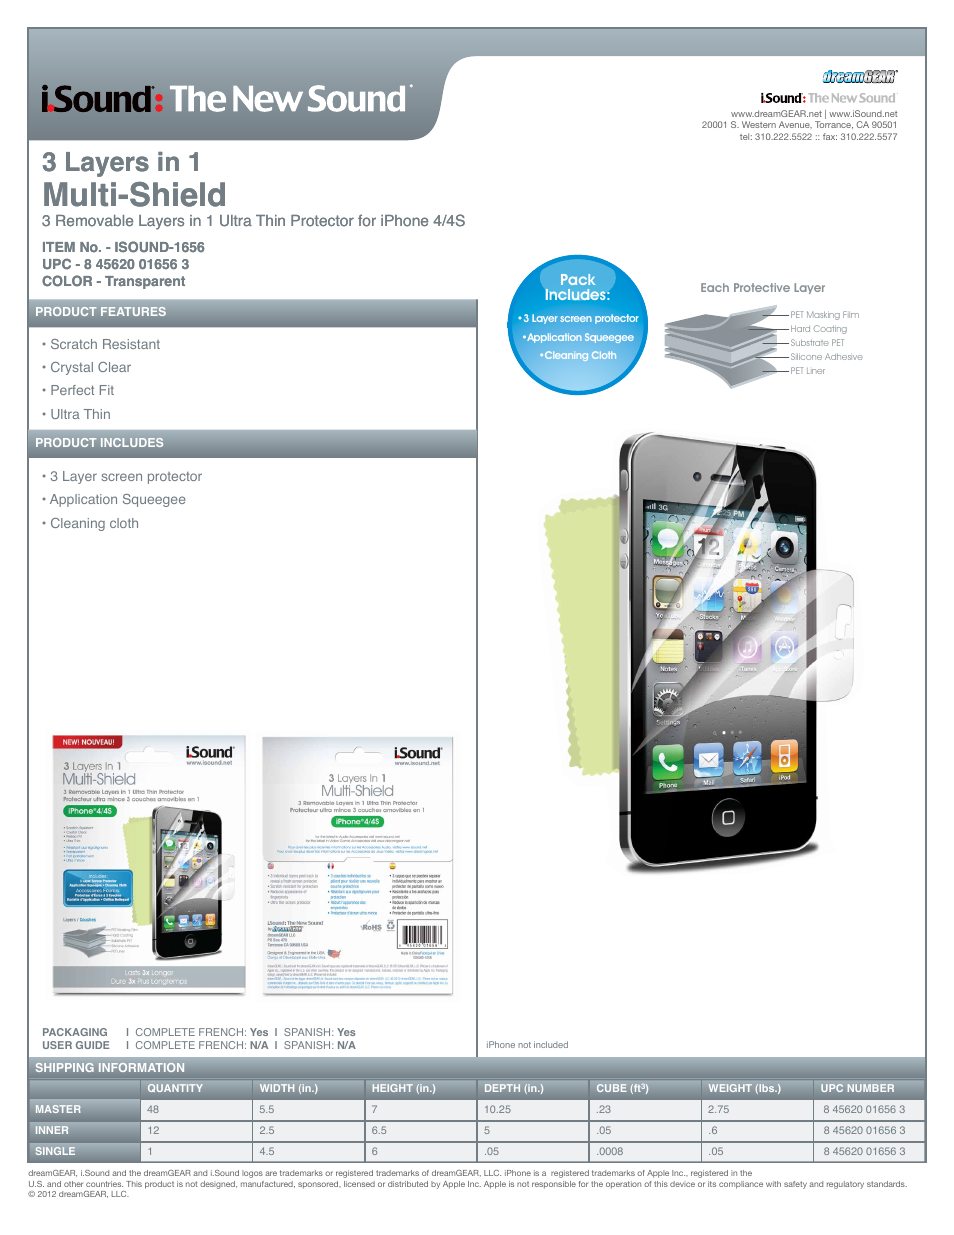 3 Layers in 1 Multi-Shield for iPhone4-4S - Sell Sheet